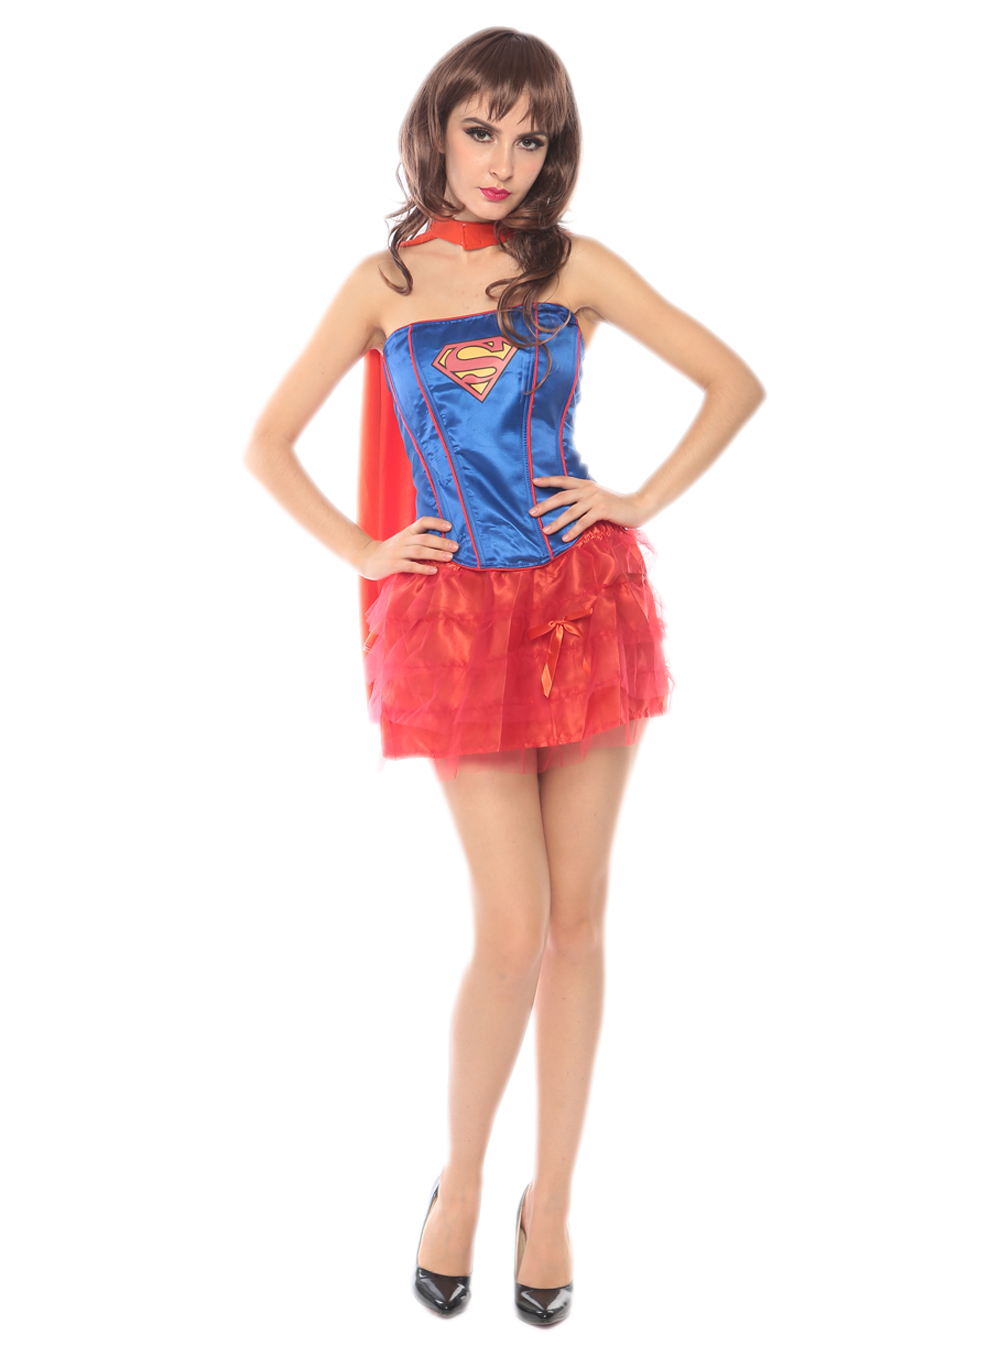 F1725 blue and red tutu superwomen costume,it comes with eyeshade,cape,dress